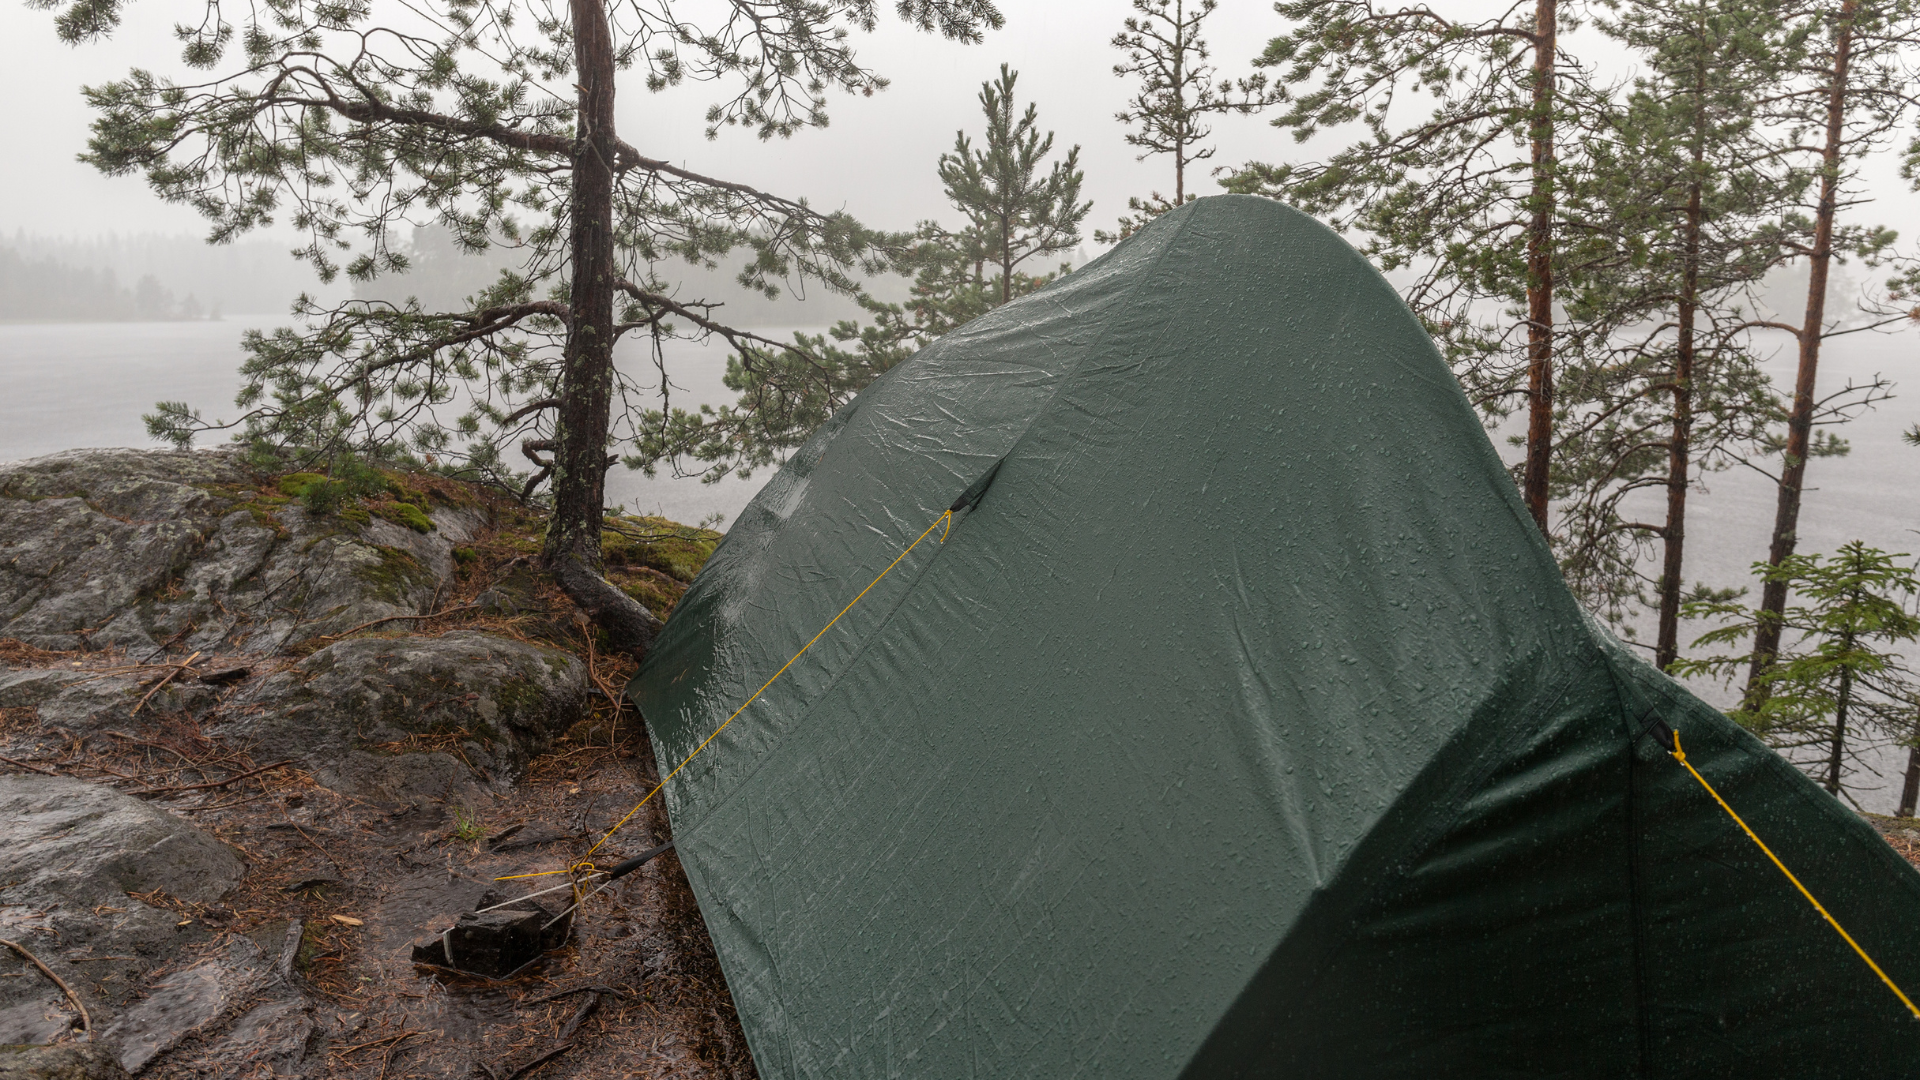 Tent and rainfly in rainy forest